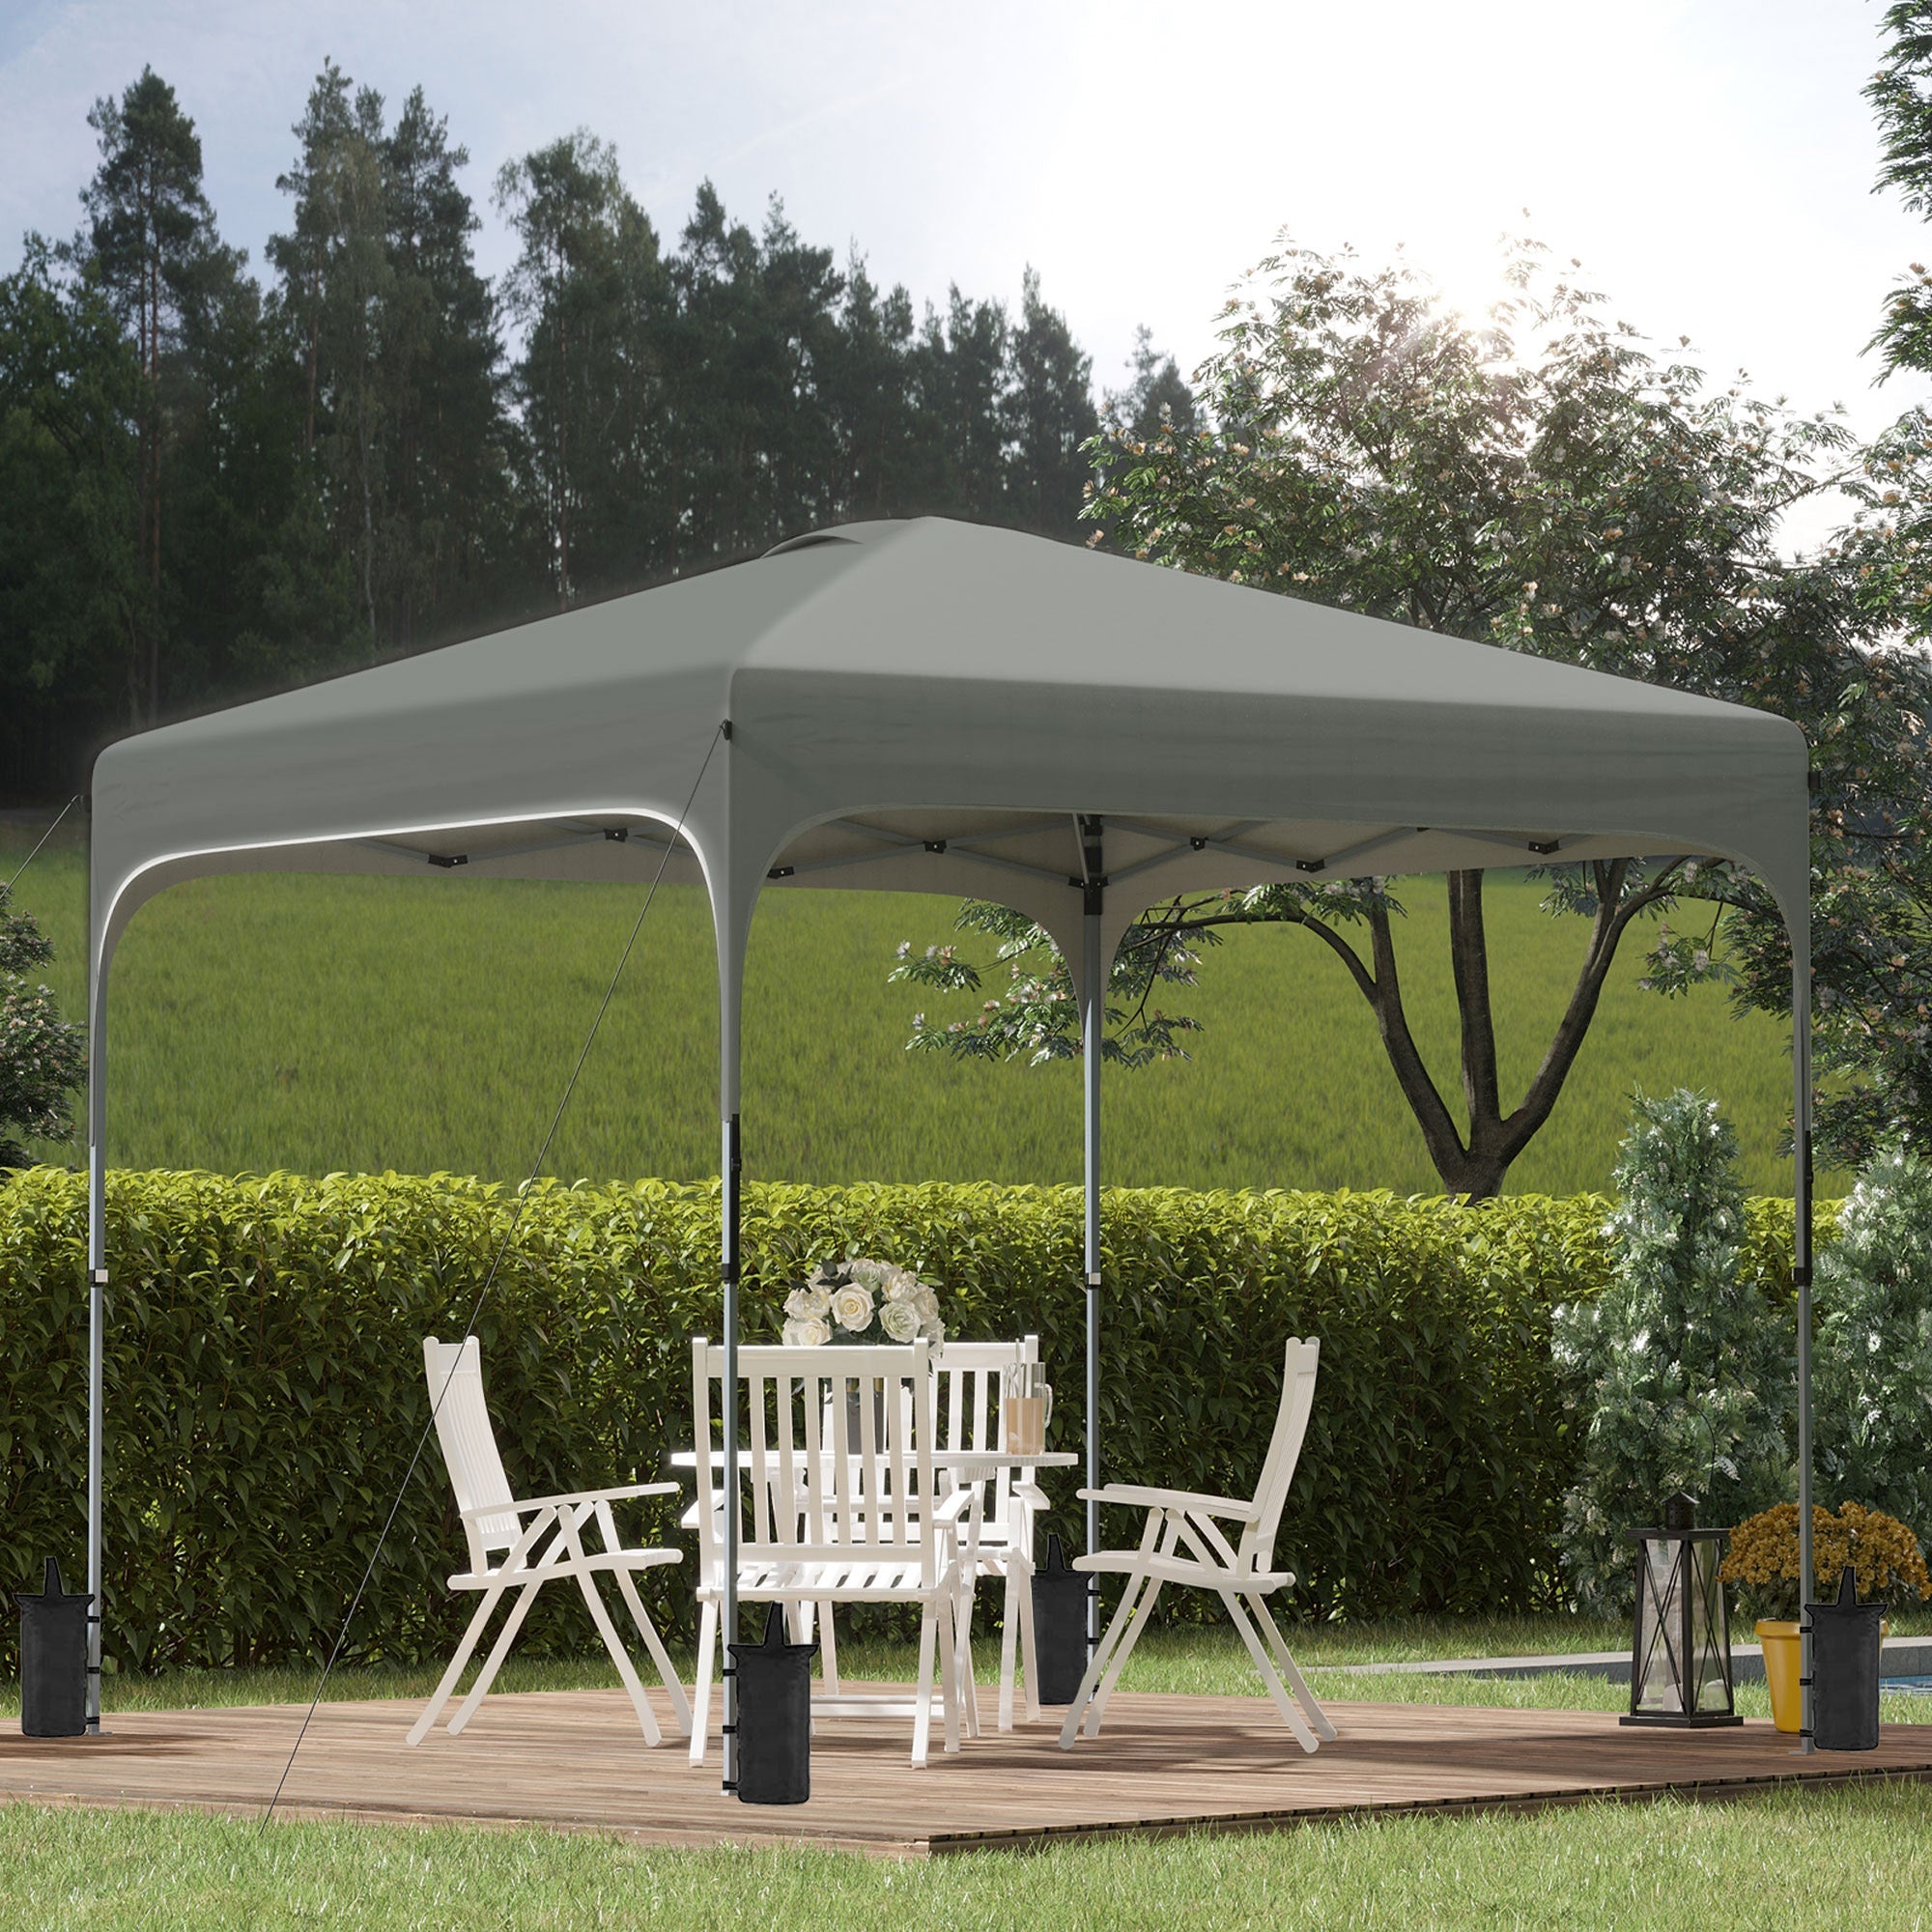 Outsunny 10' x 10' Pop Up Canopy, Foldable Gazebo Tent with Carry Bag with Wheels and Outdoor Garden Patio Party Dark Grey